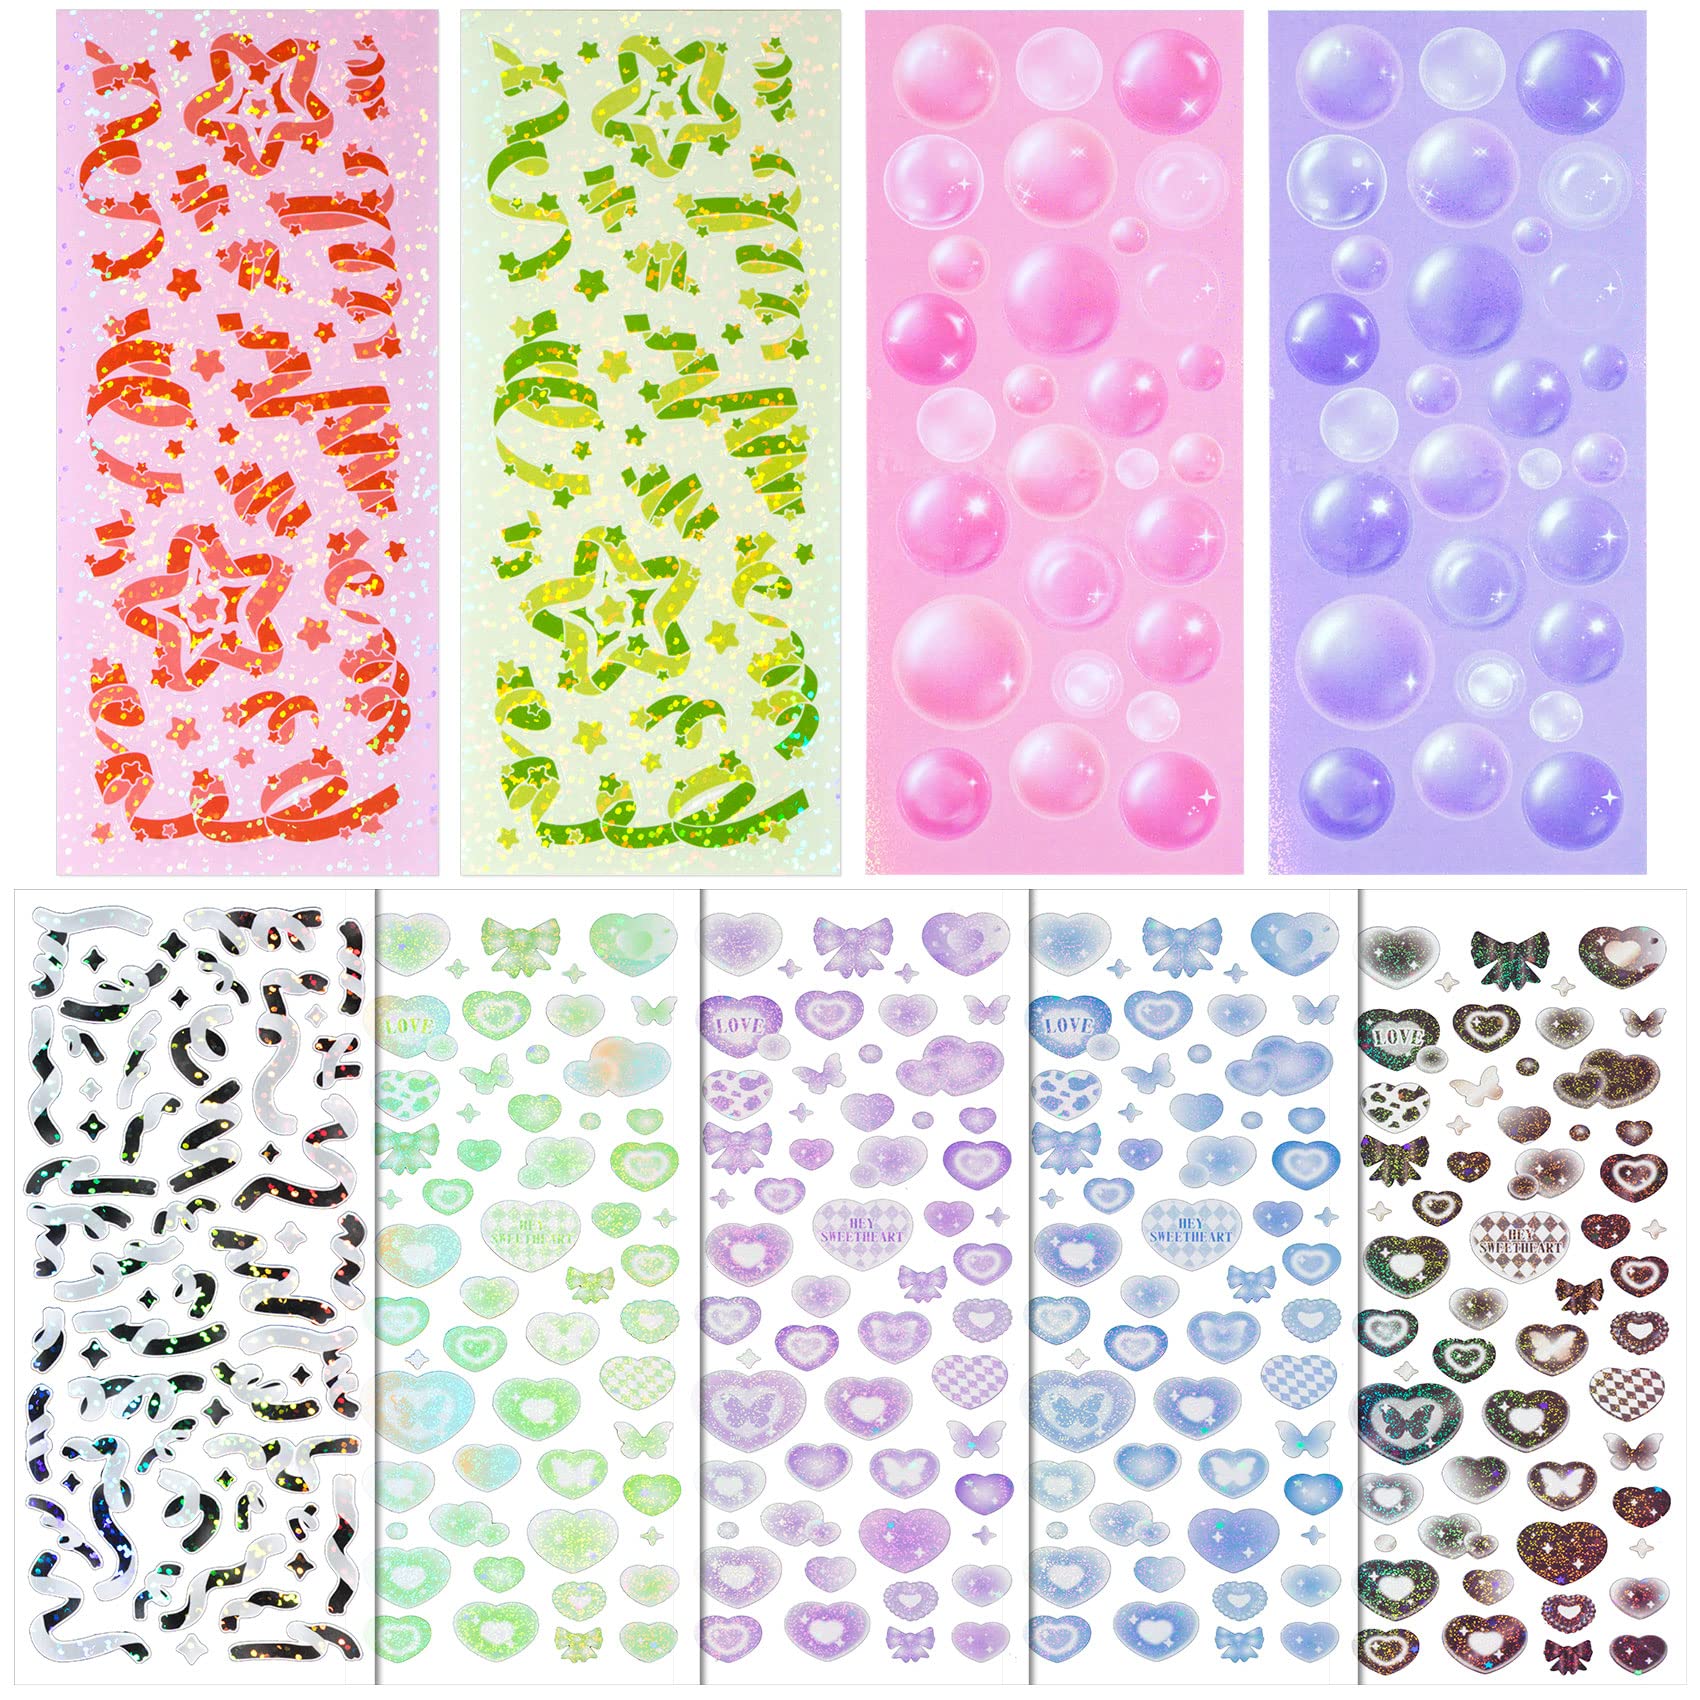 4 Sheets Scrapbooking Stickers Colorful Bubble Pattern Craft